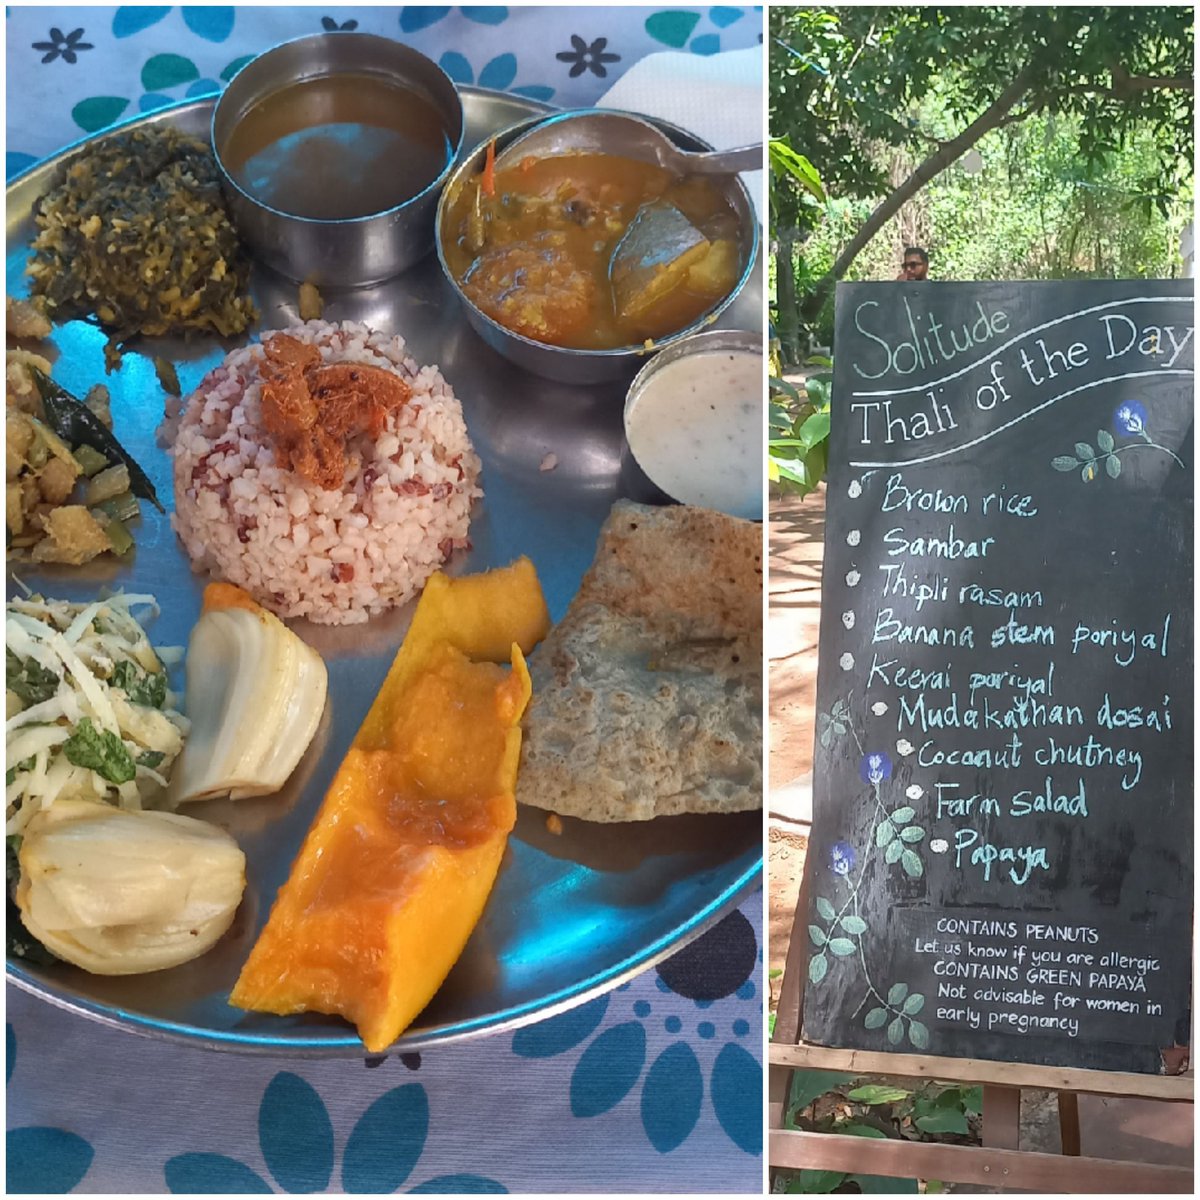 An entire week of very healthy, natural, organic, scarcely travelled food has been great to have.

As of now, i feel even more active and lighter than i always have. 

#organiclifestyle #healthylifestyle #food #health #freshfood #auroville